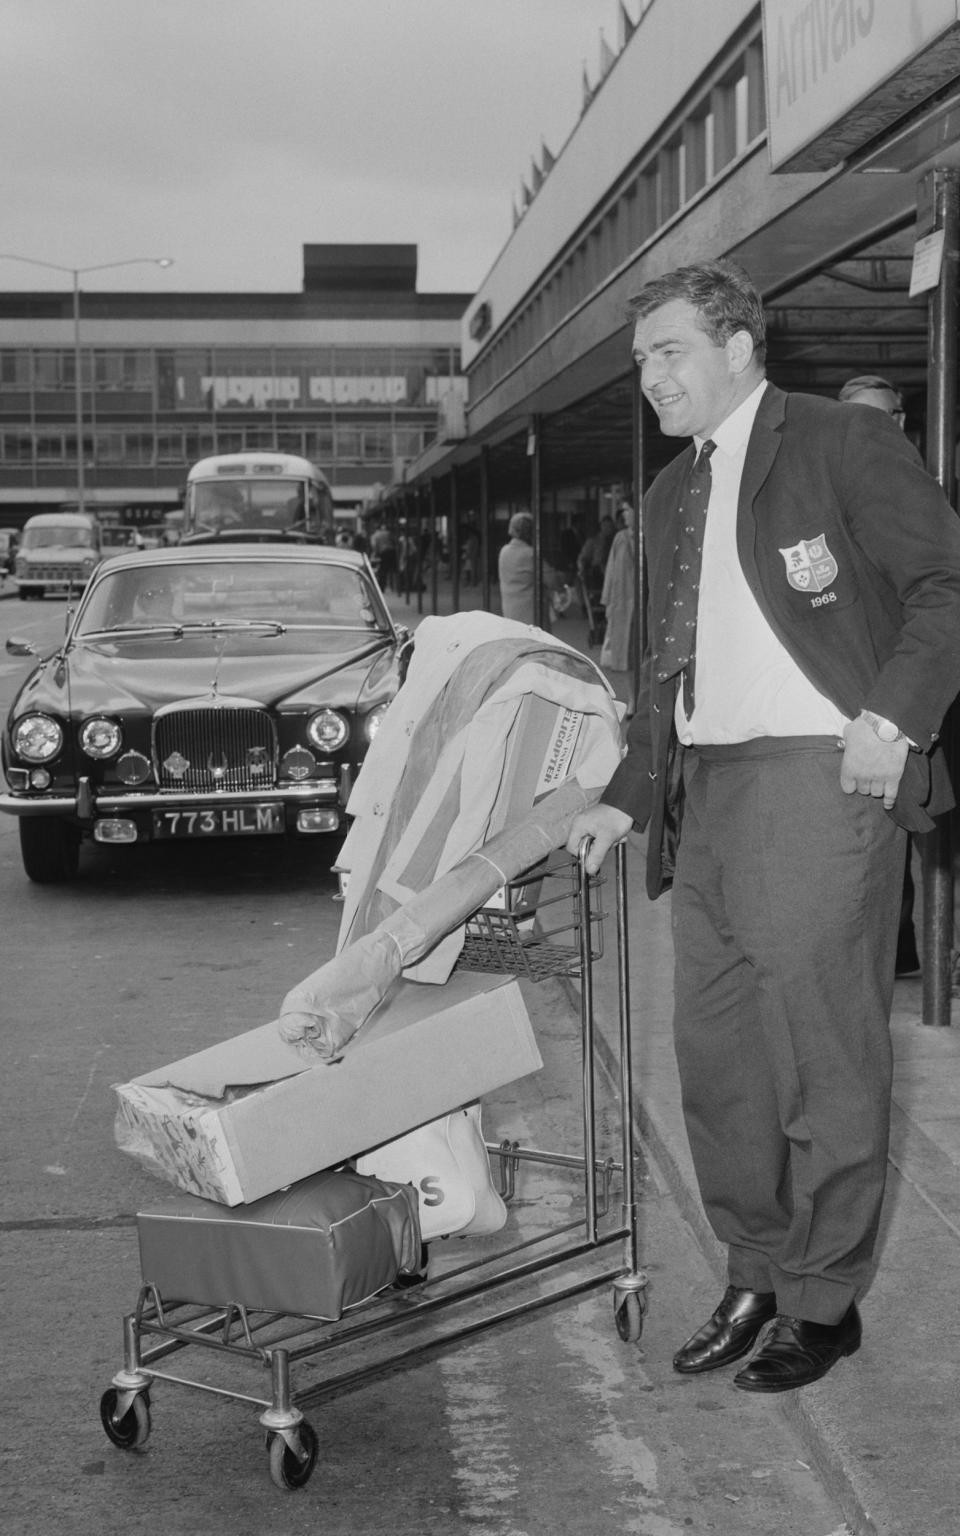 Millar arrives at Heathrow at the end of the 1968 Lions tour to South Africa